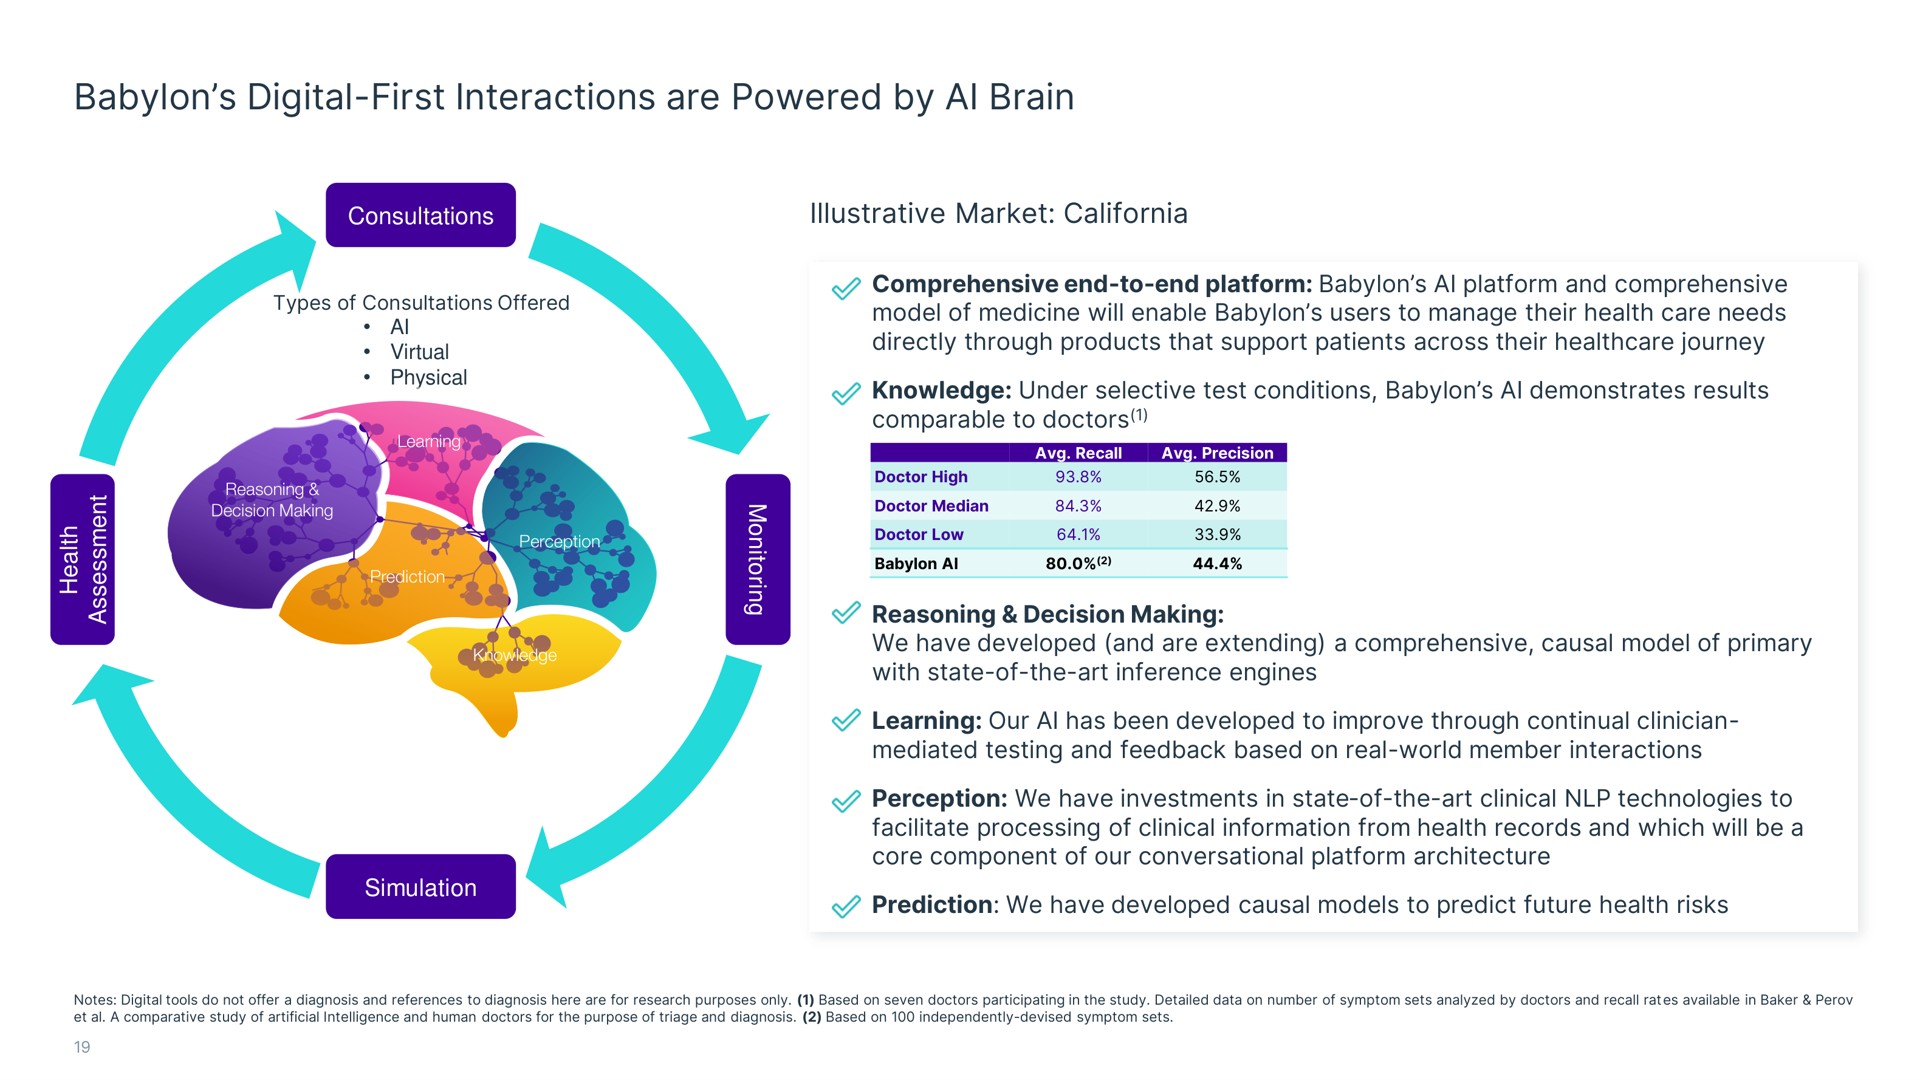 digital first interactions are powered by brain | Babylon